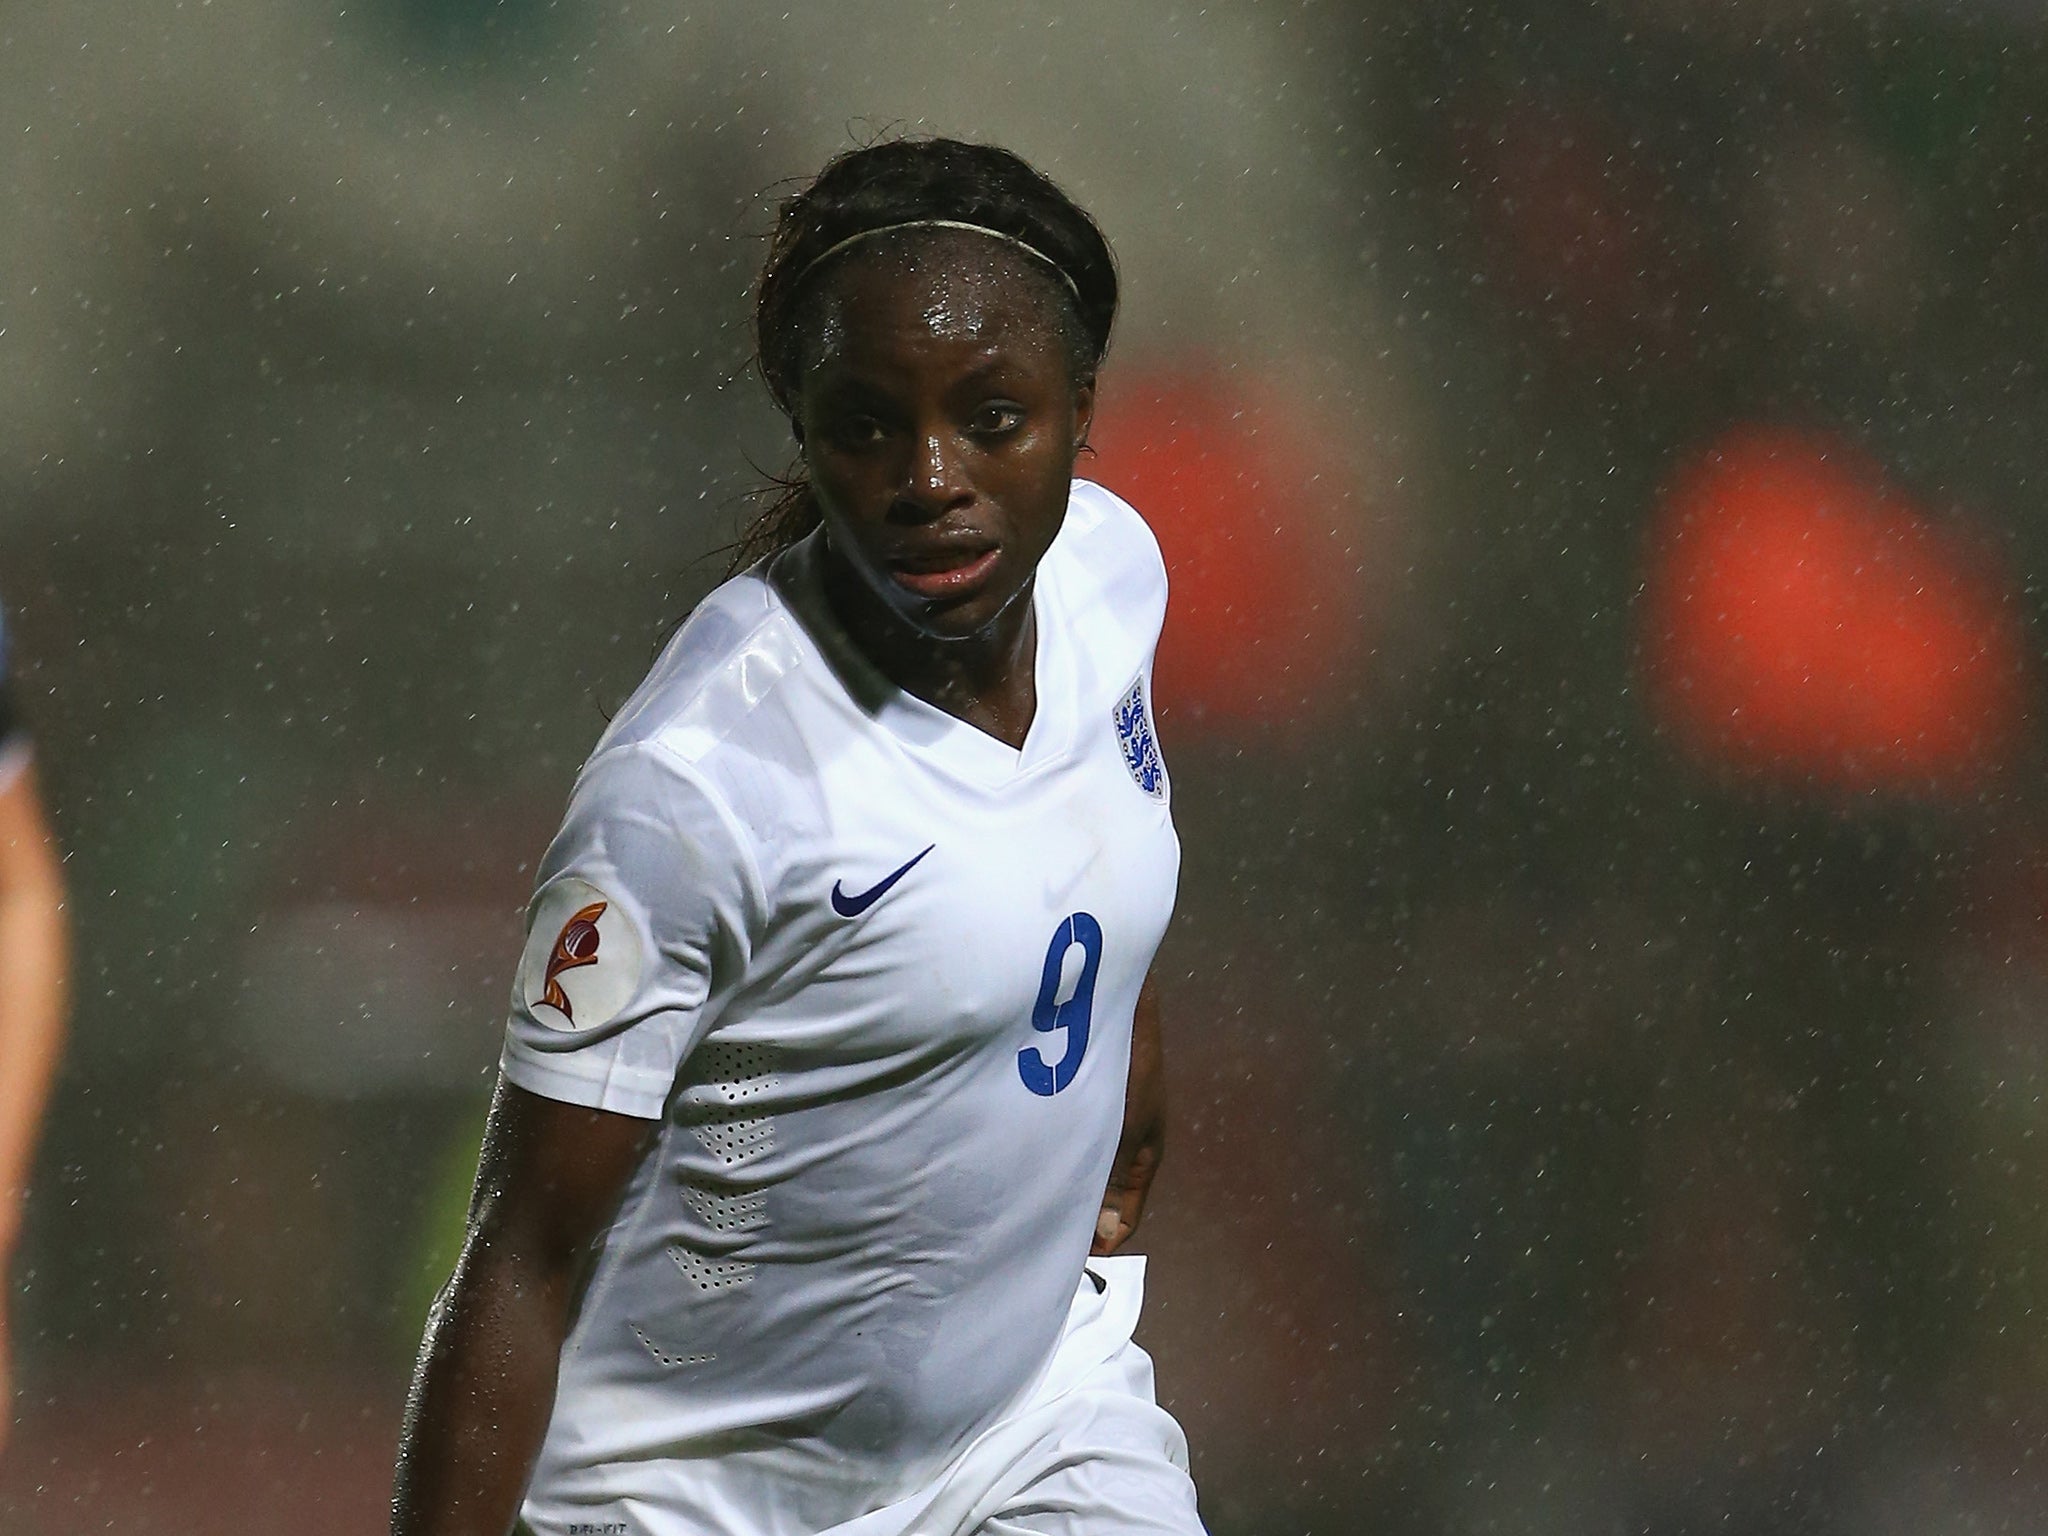 Eni Aluko has not played for England since her complaints were raised in May 2016